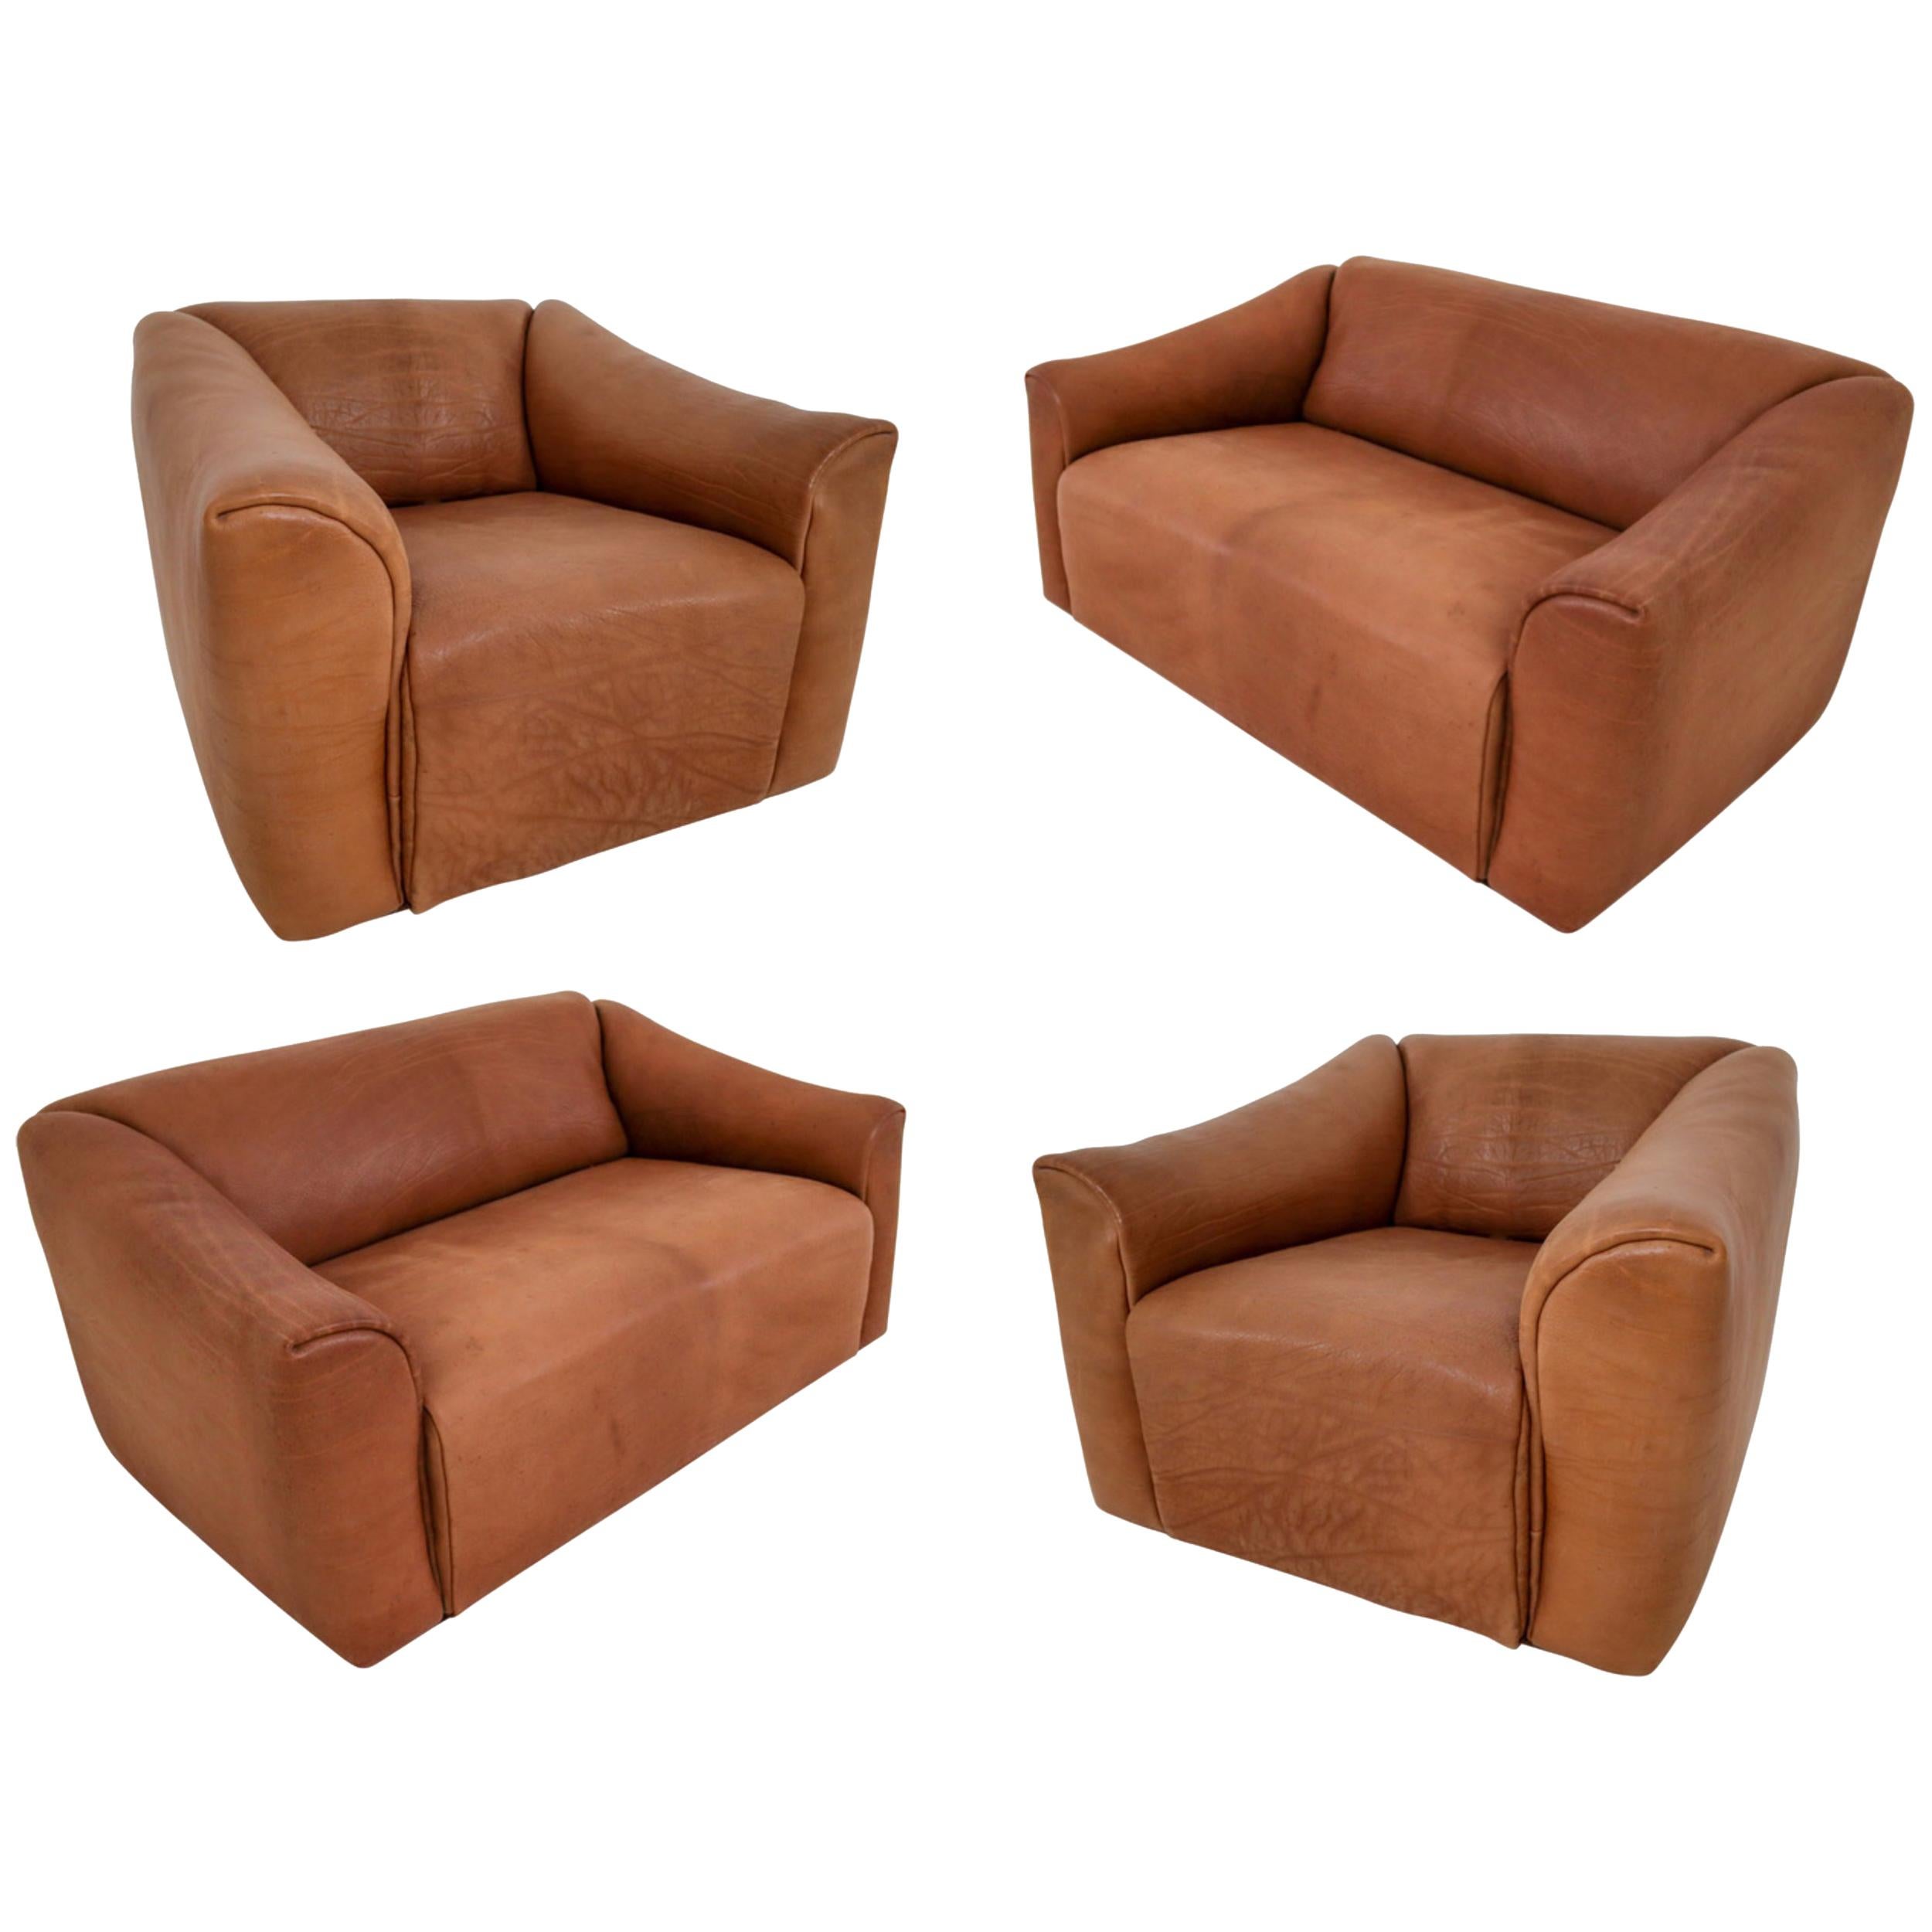 Patinated Cognac Leather "DS-47" Seatings by De Sede in Switzerland, circa 1970s